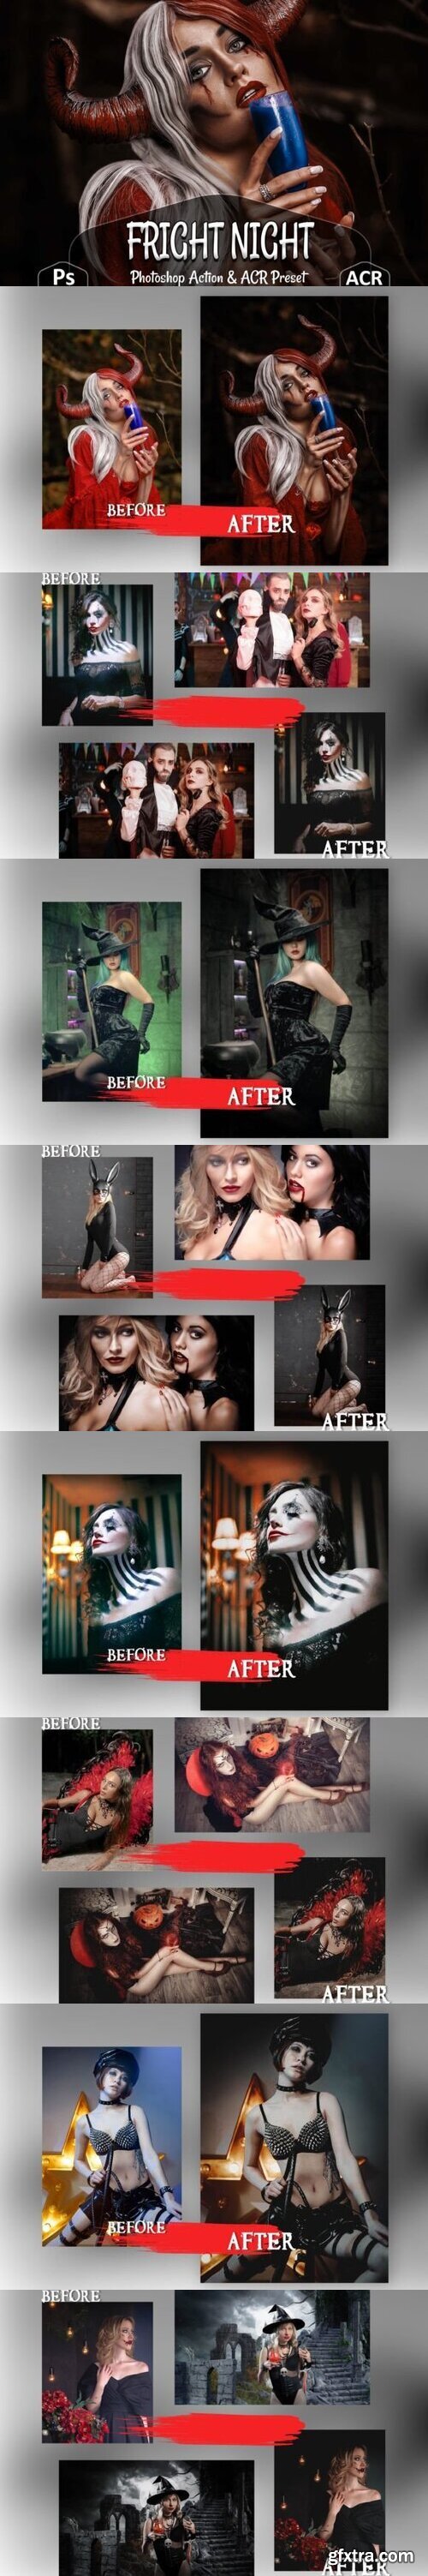 10 Fright Night Photoshop Actions